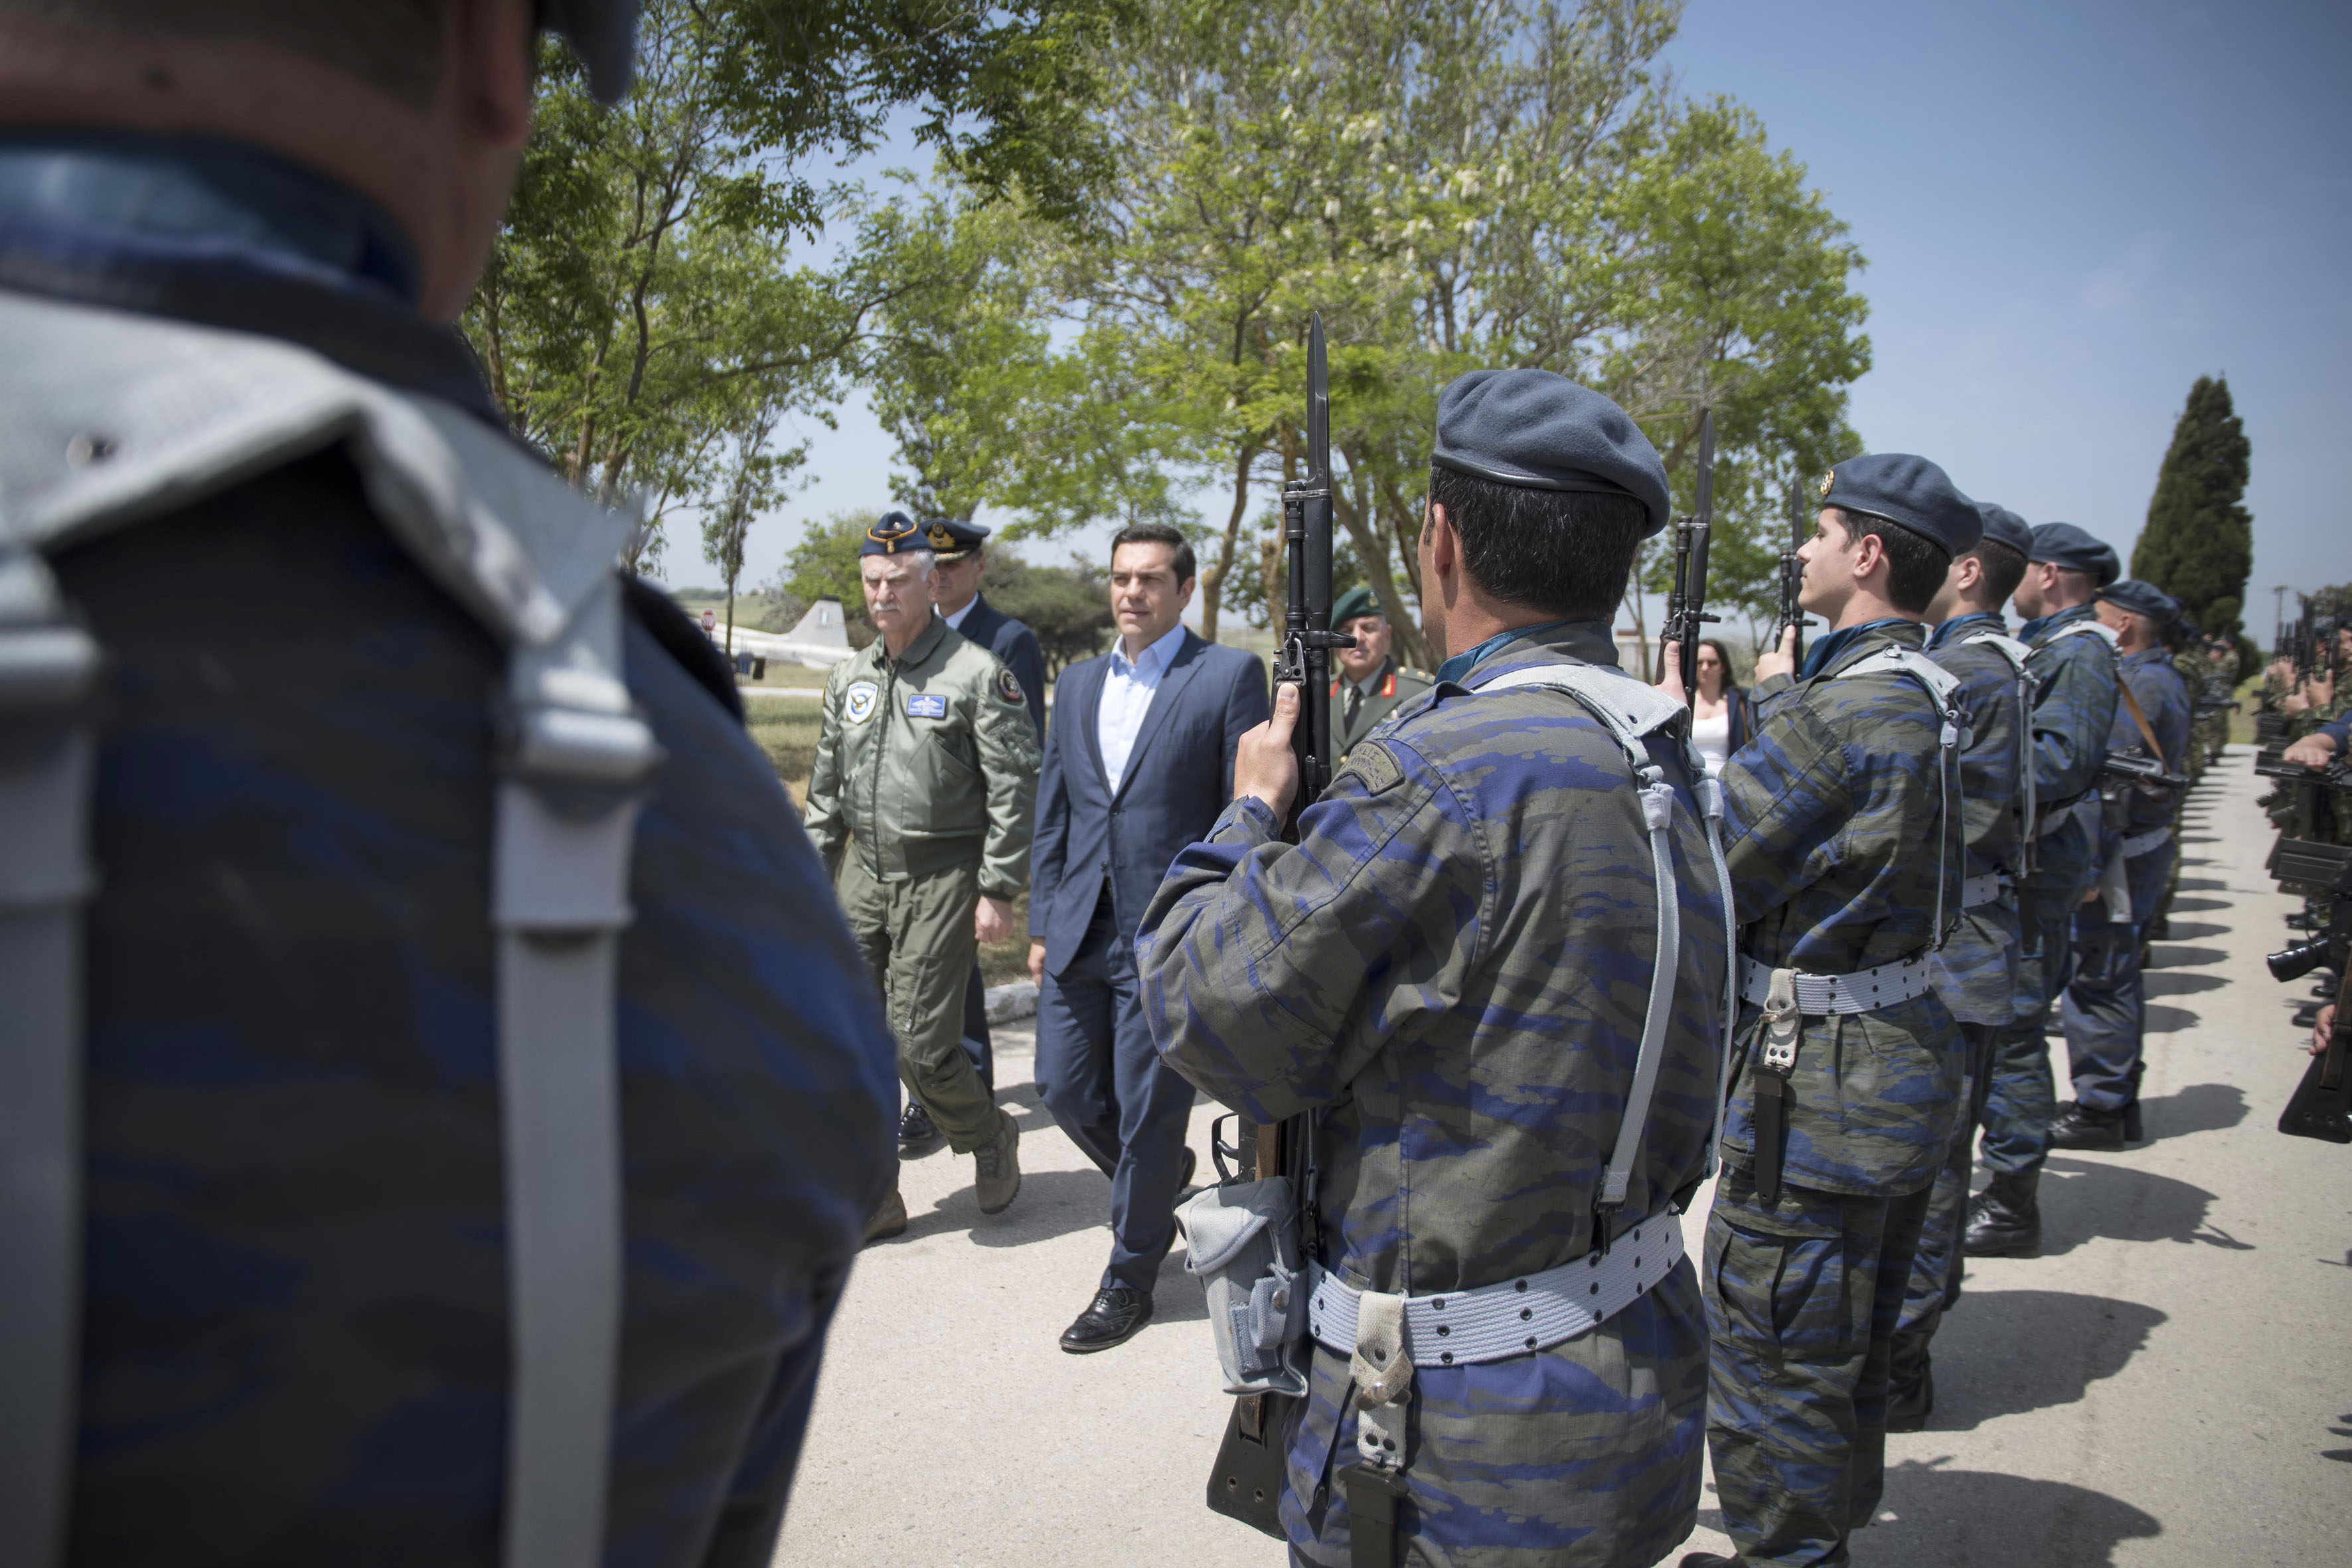 From Lemnos, Tsipras stresses Greece’s geopolitical role, deterrent power